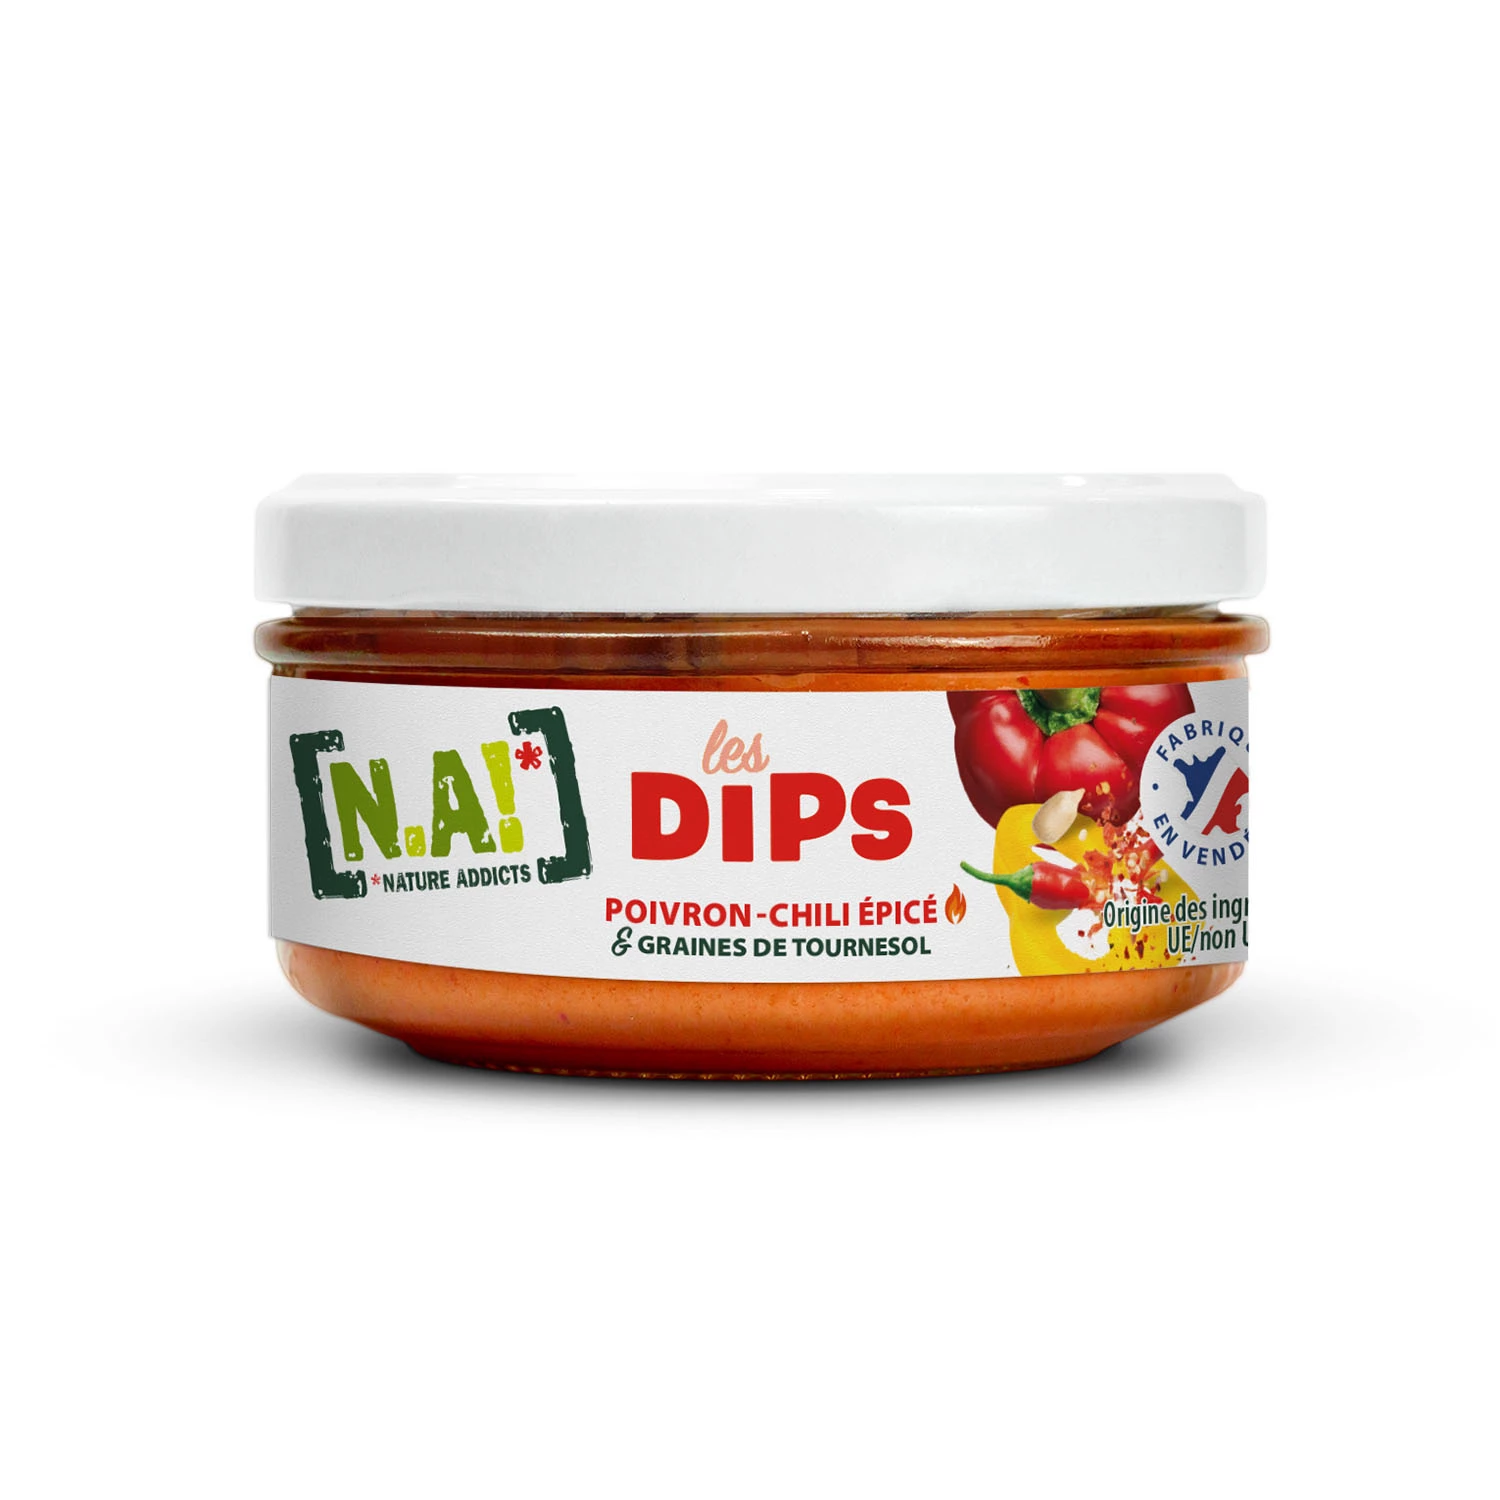 Spicy Chili Pepper & Sunflower Seed Dips, 140g - N.A!